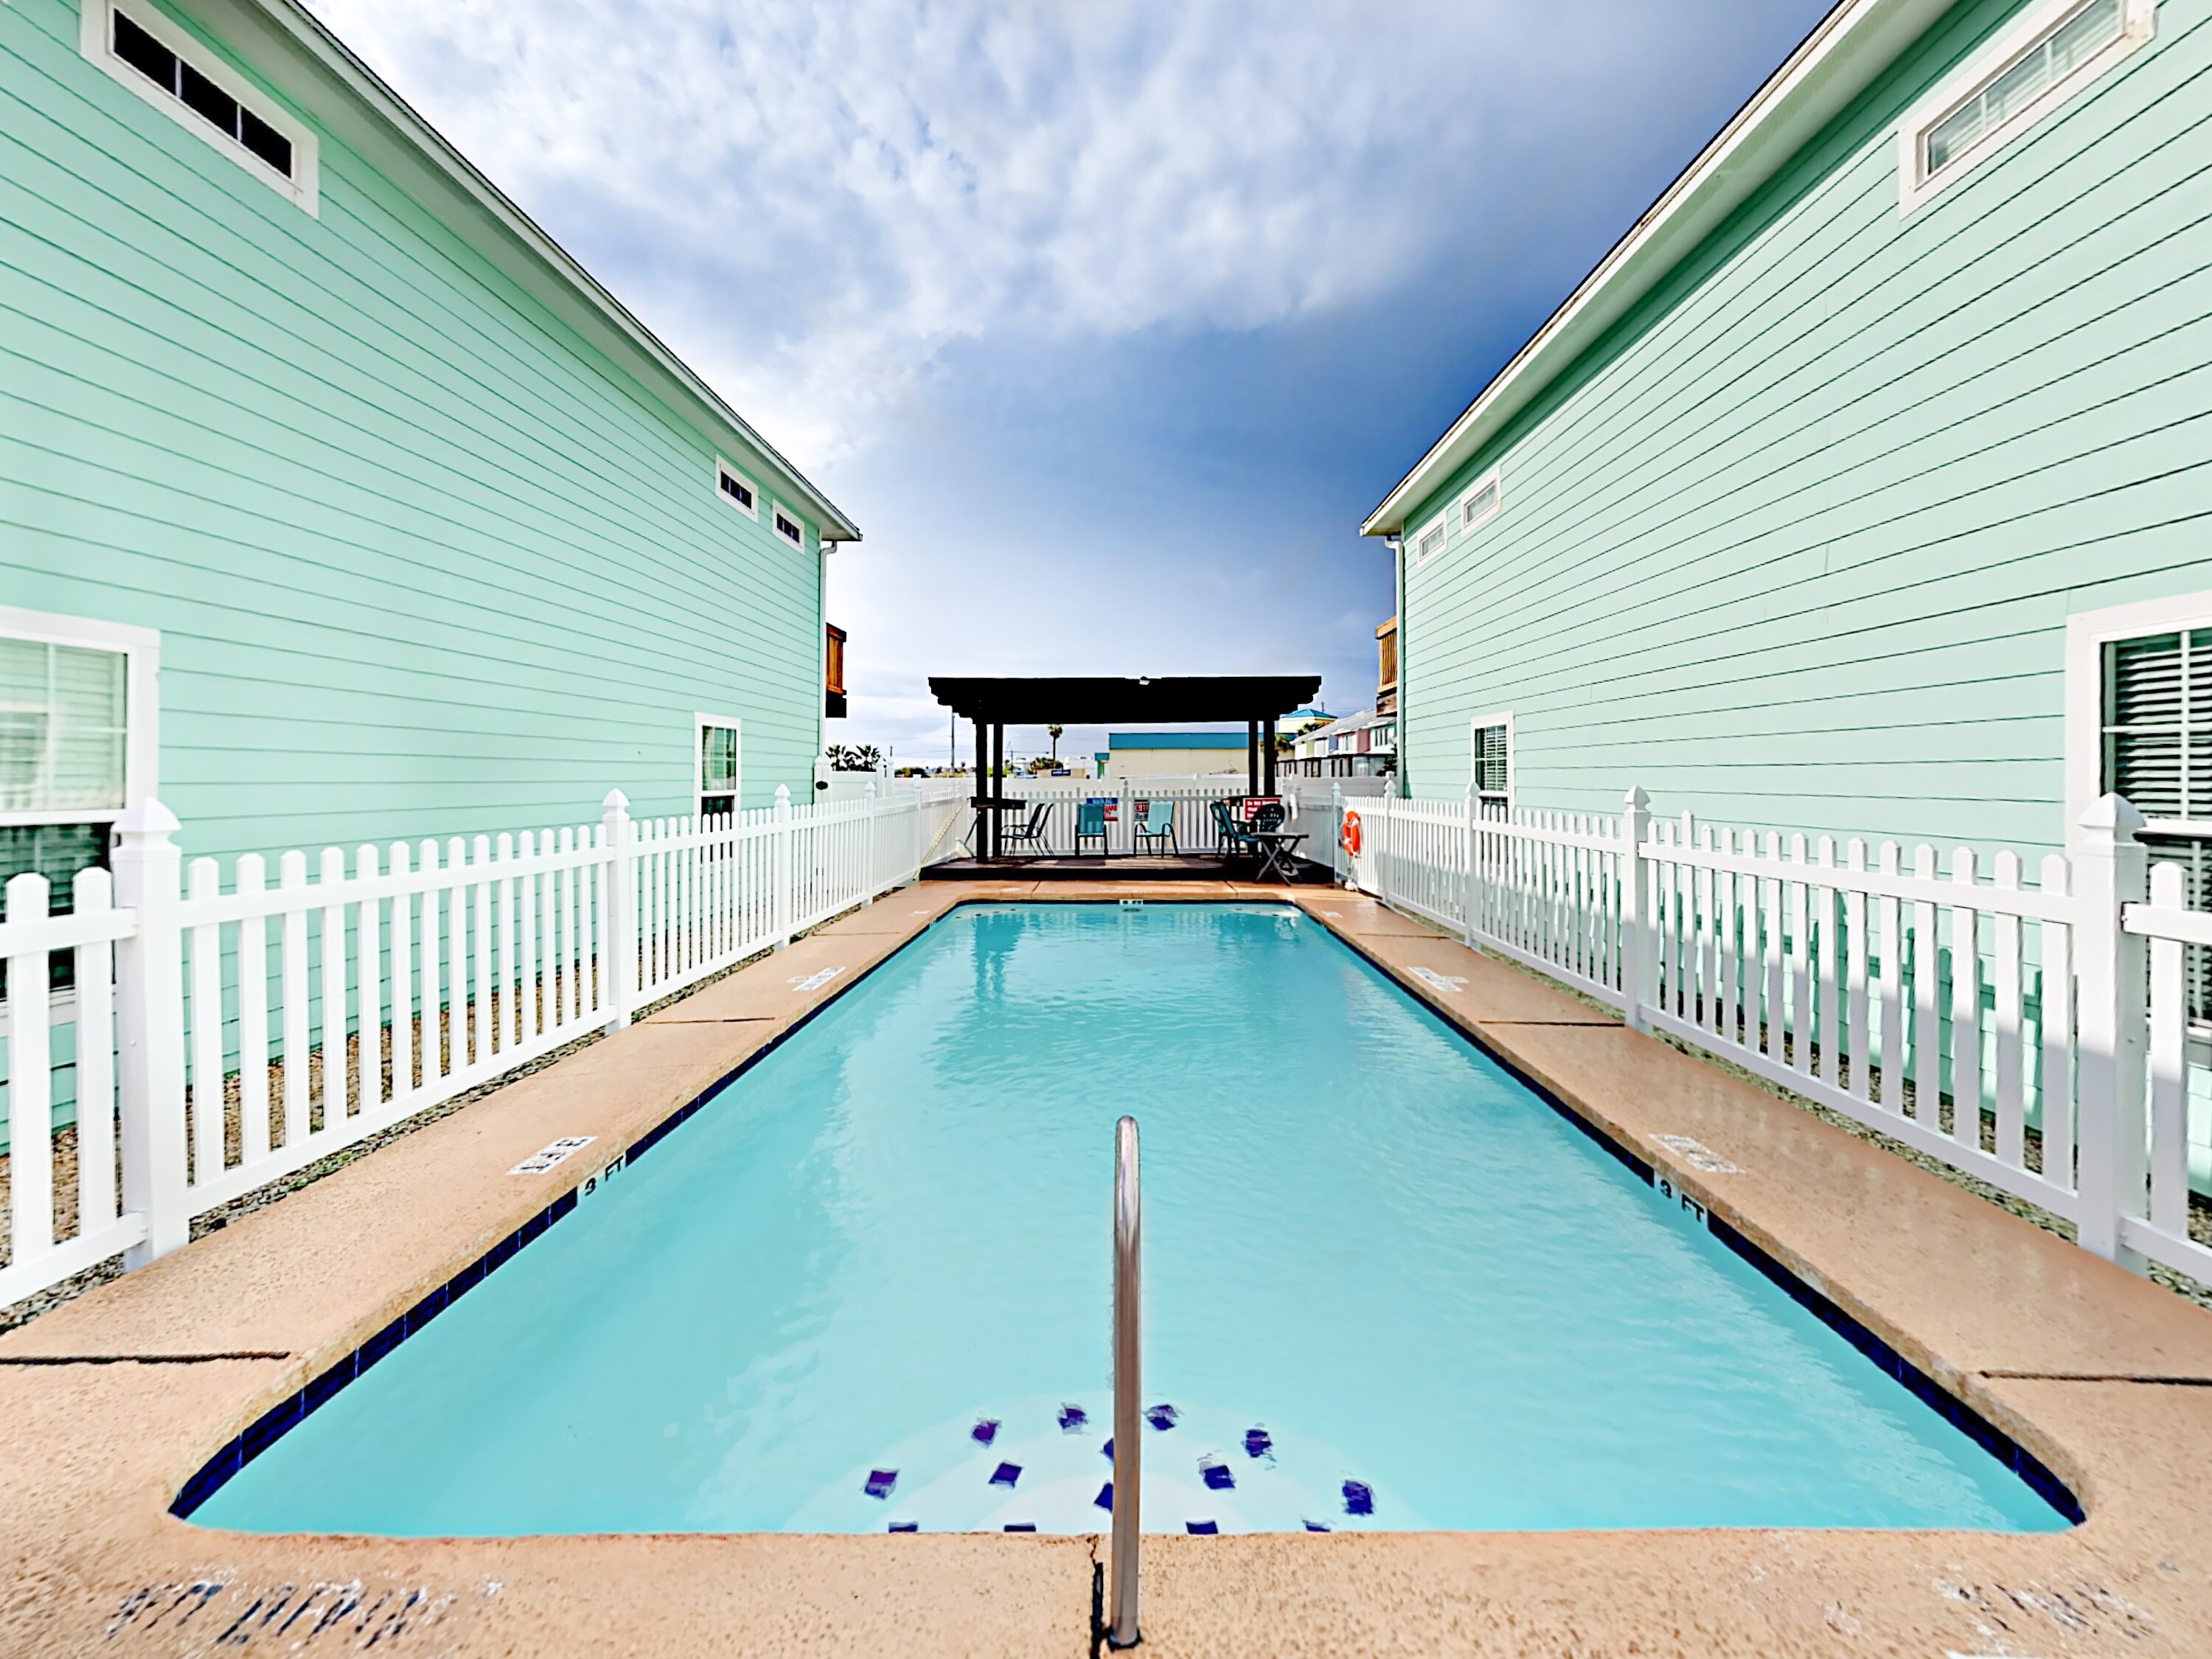 Take a luxuriating dip in the shared pool.